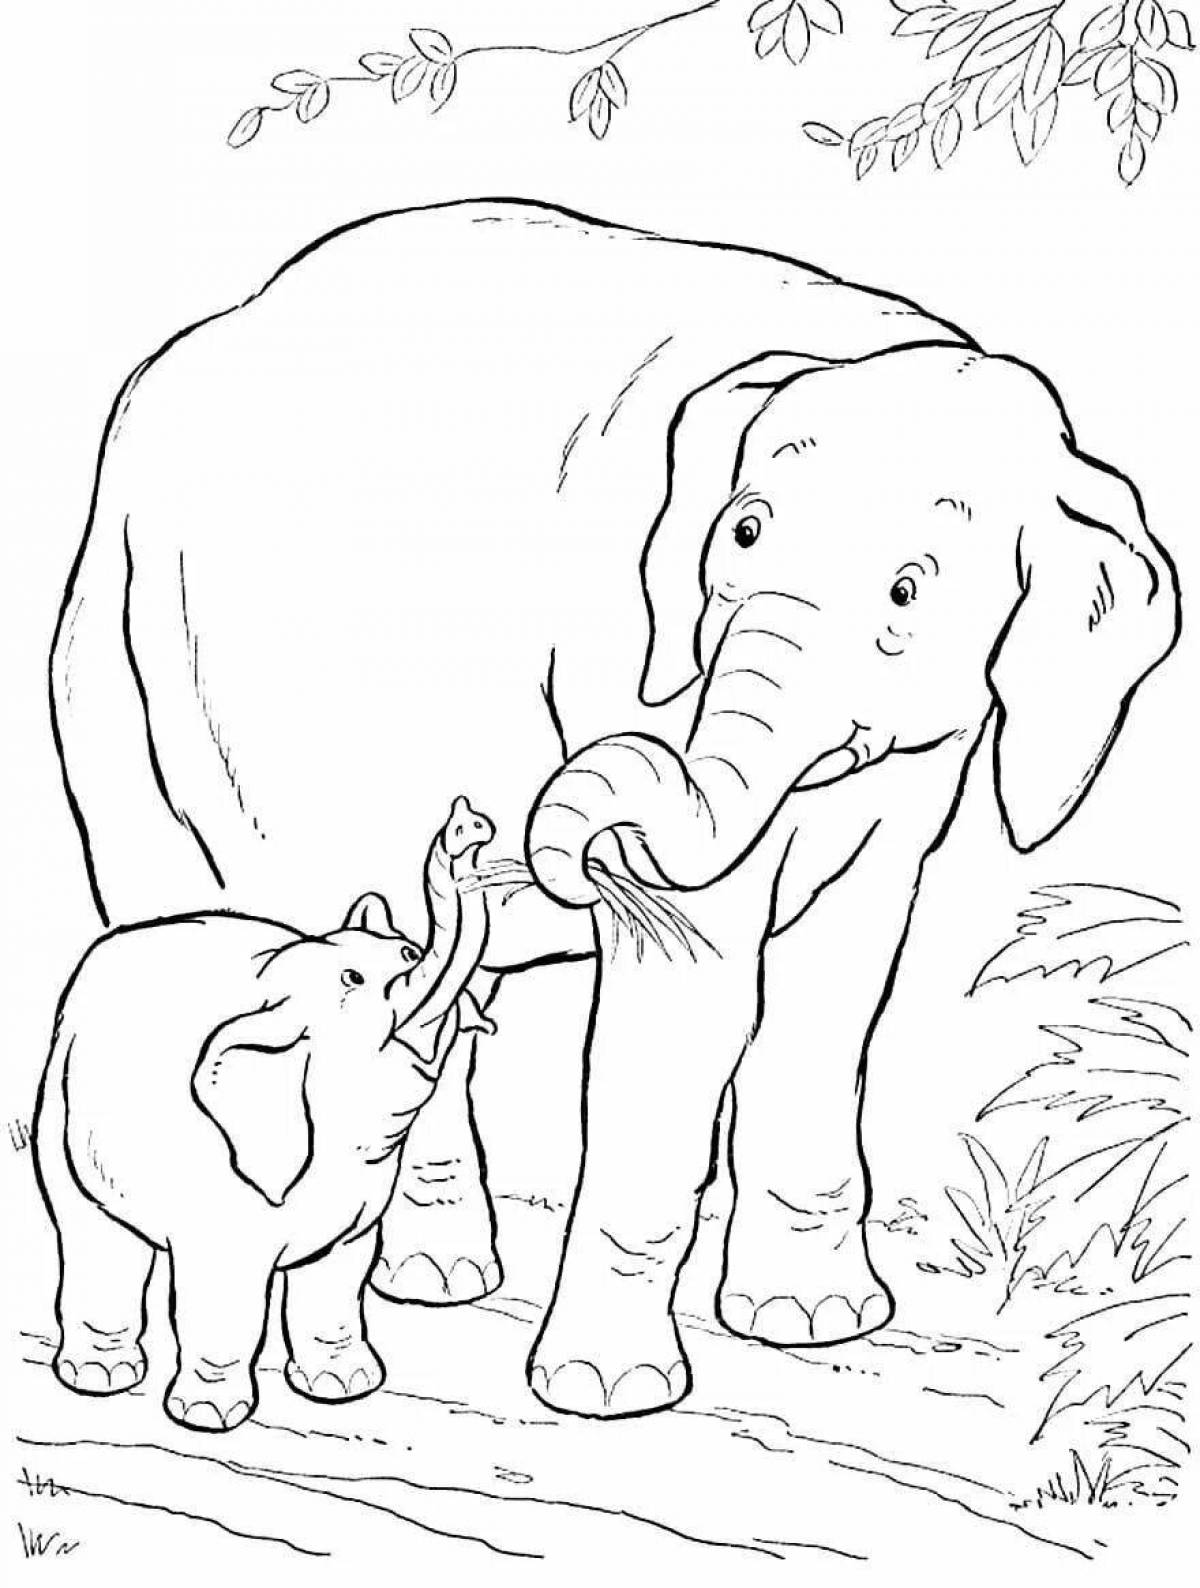 Mystical coloring book where elephants live